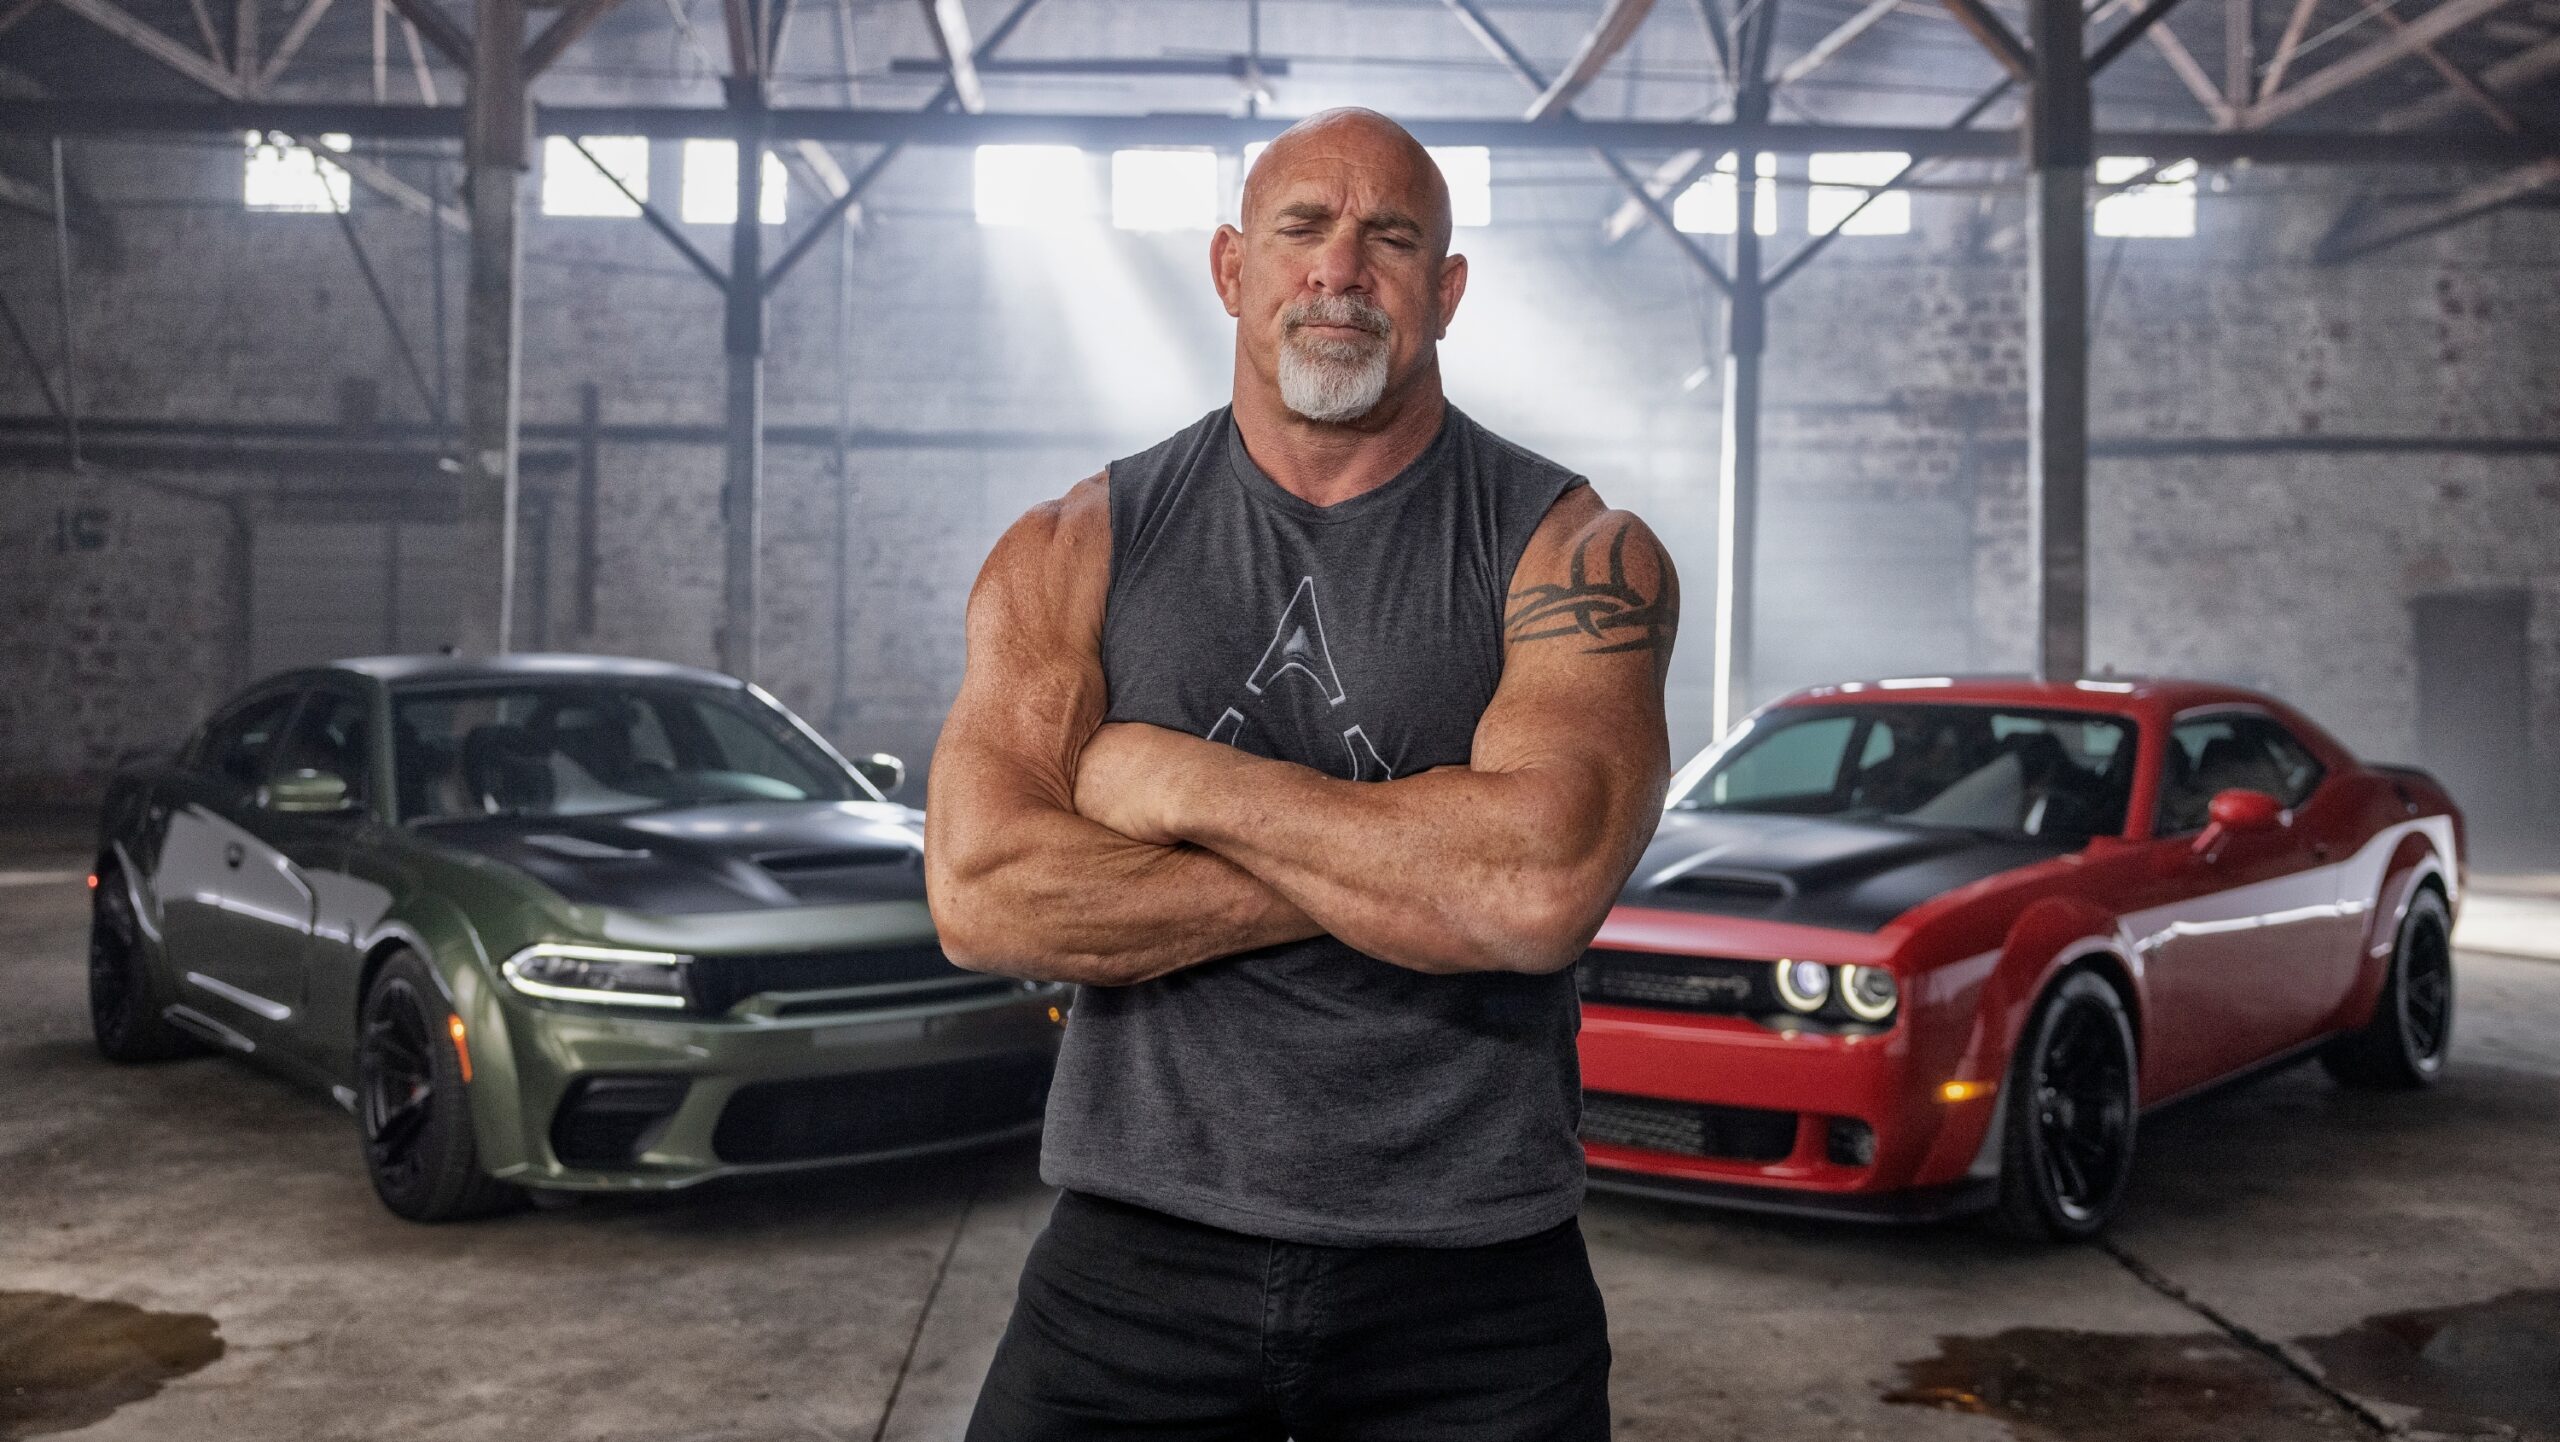 Dodge-is-looking-to-hire-its-Chief-Donut-Maker-with-the-help-of-Bill-Goldberg.-Dodge-6-scaled.jpg